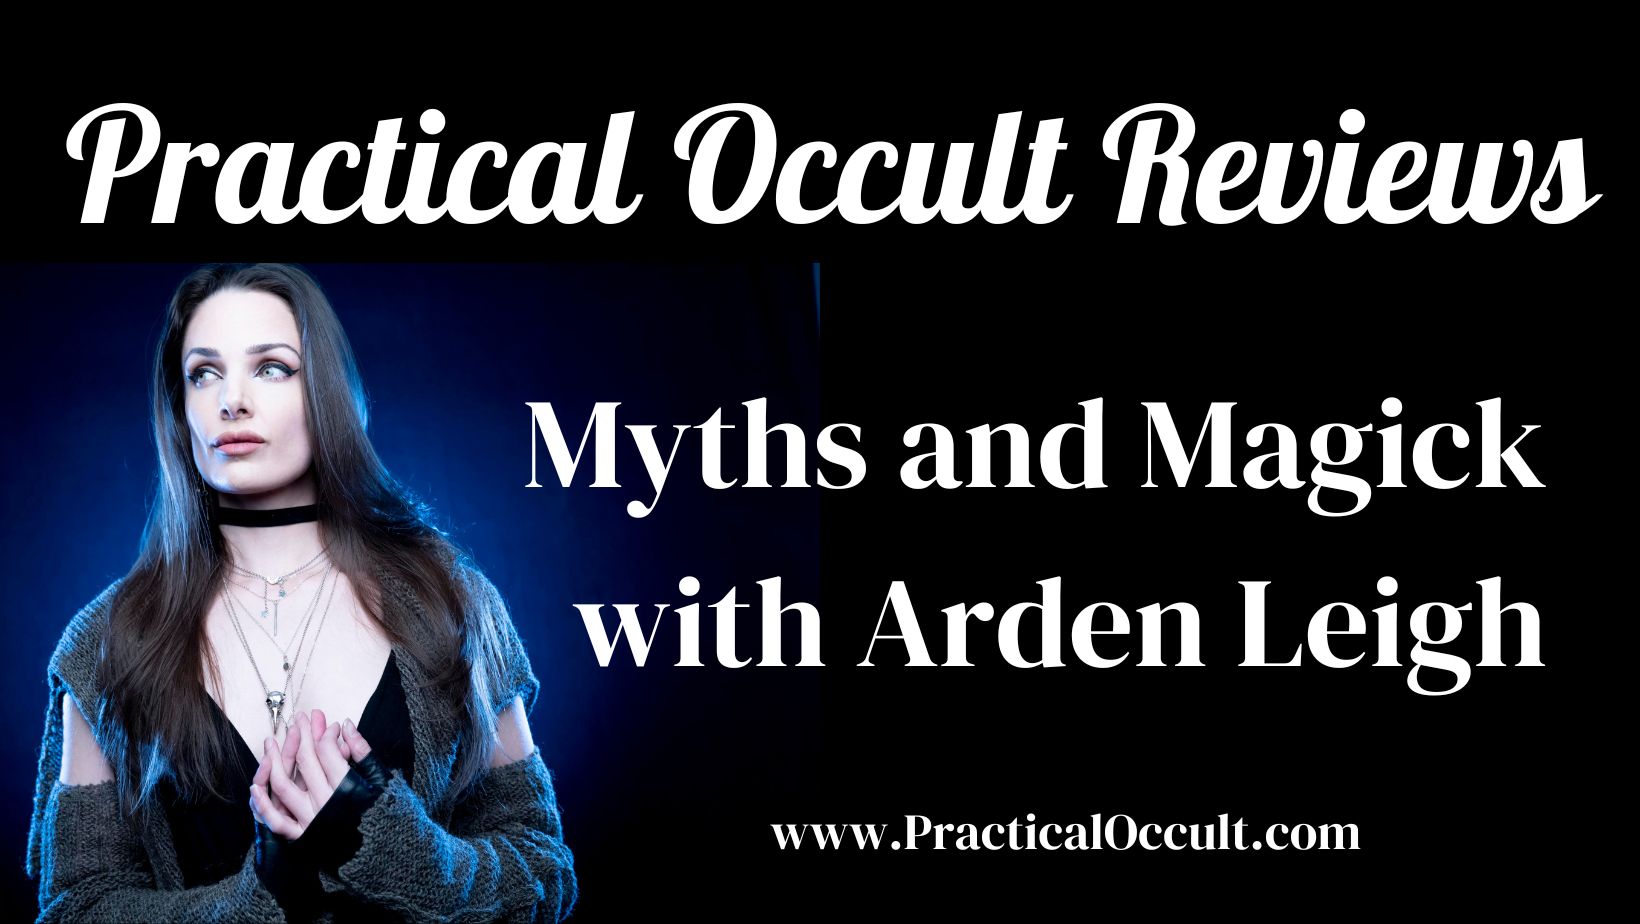 Myths and Magick with Arden Leigh- A Review